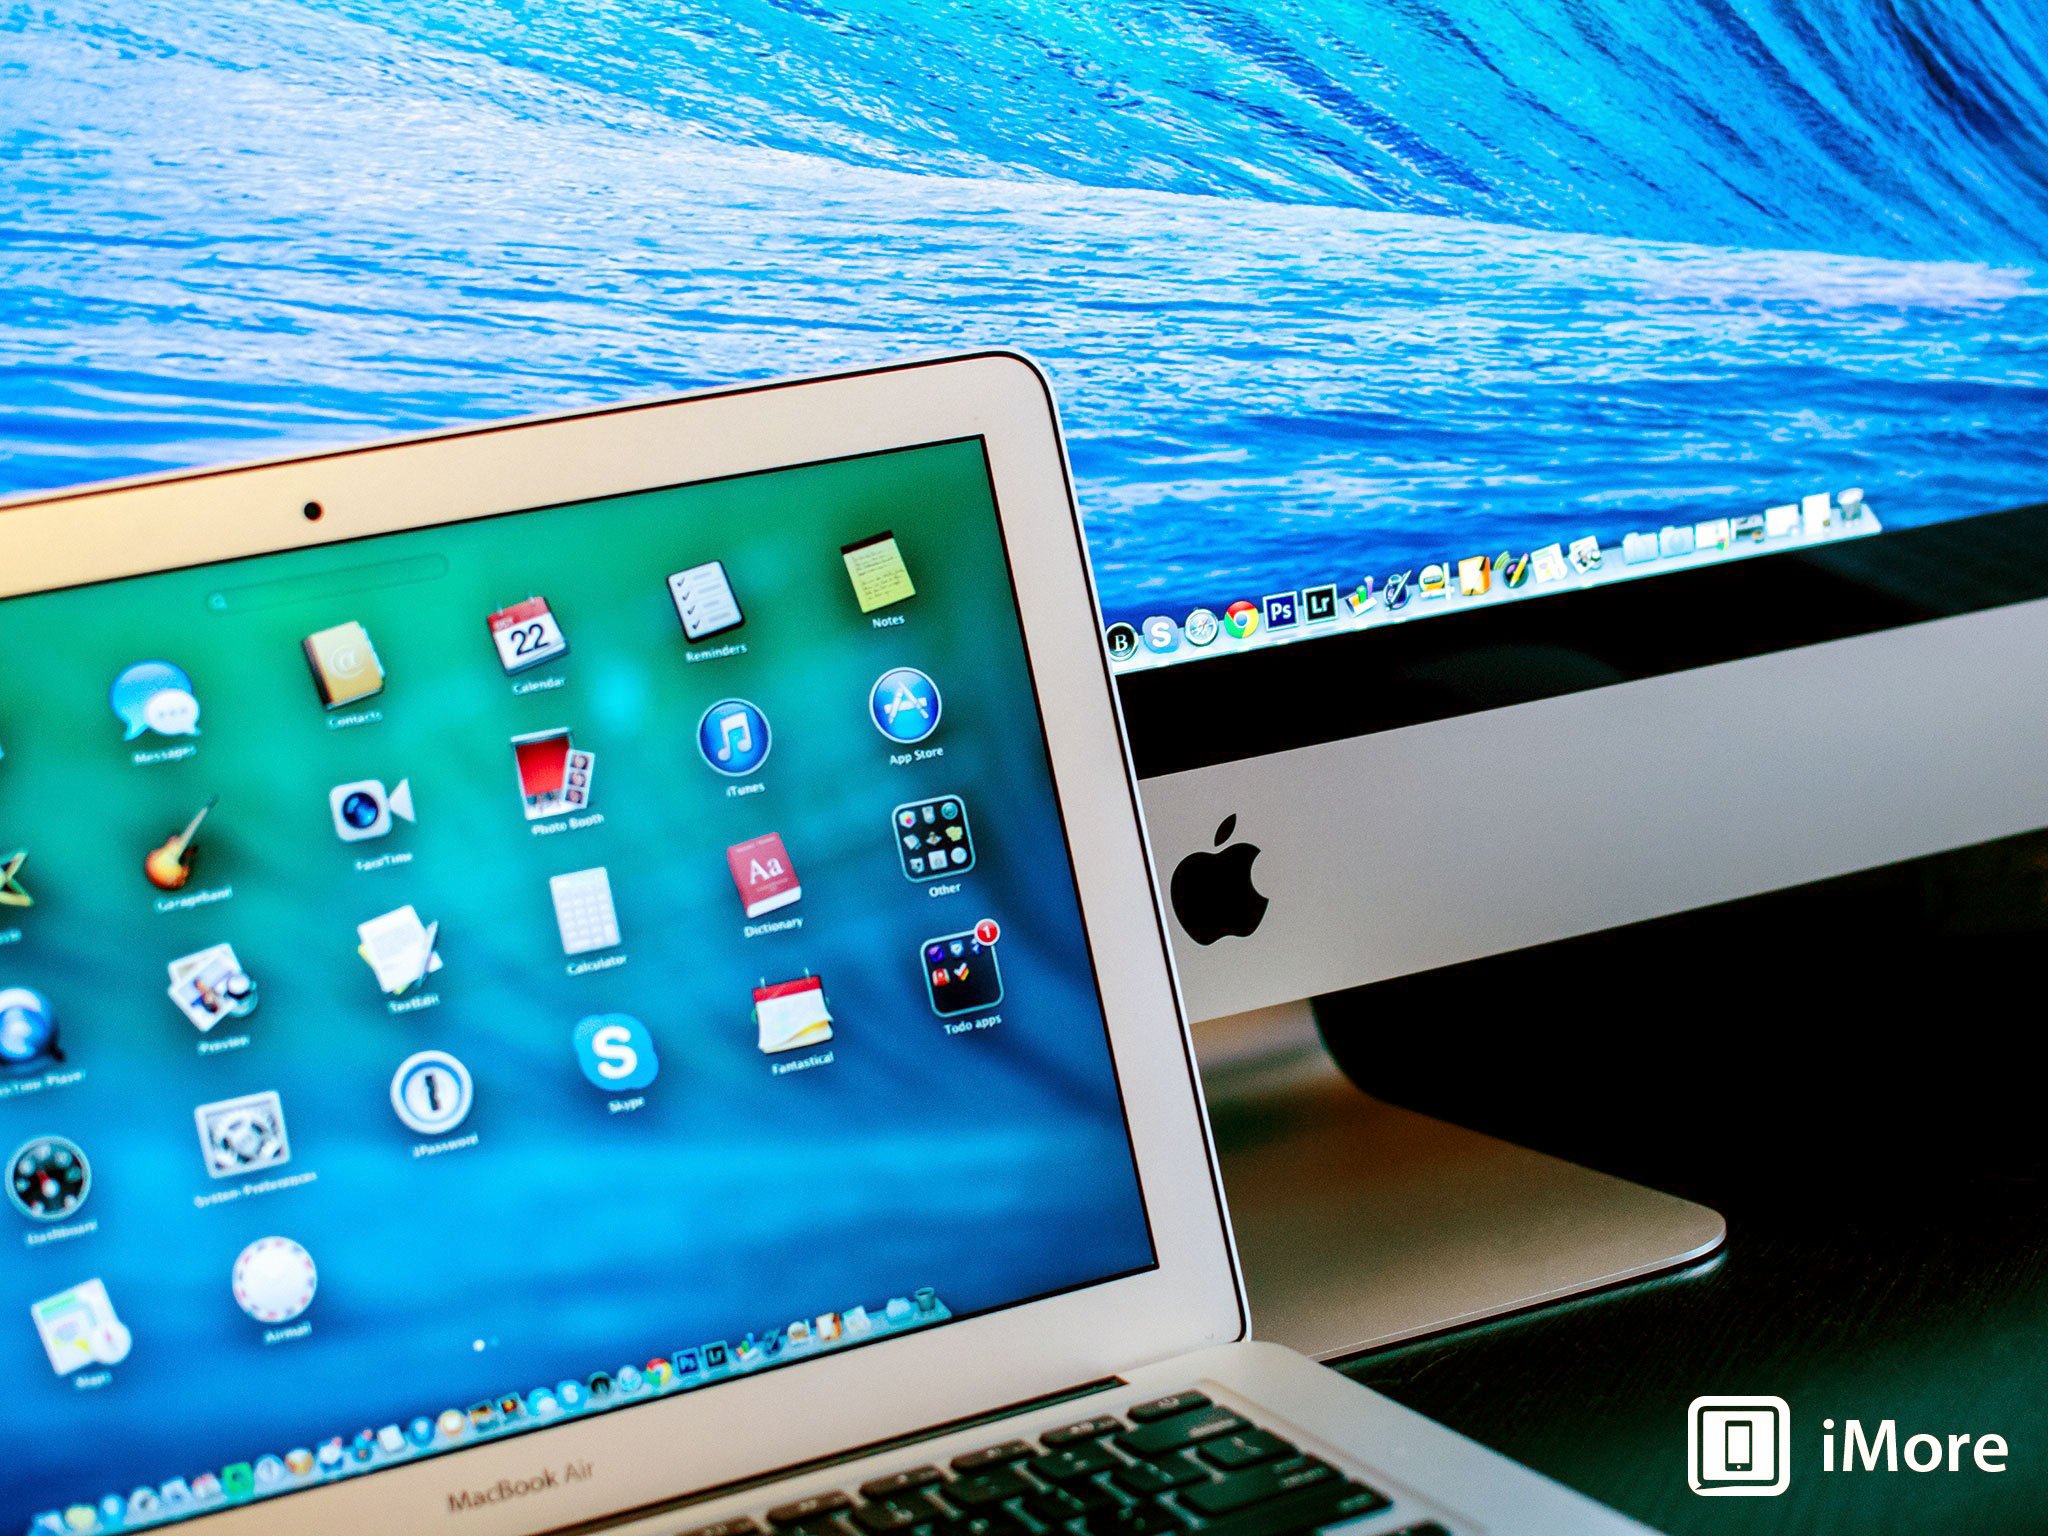 Apple updates OS X Mavericks to 10.9.2 — Fixes SSL vulnerability, adds FaceTime Audio, improves Mail and more!